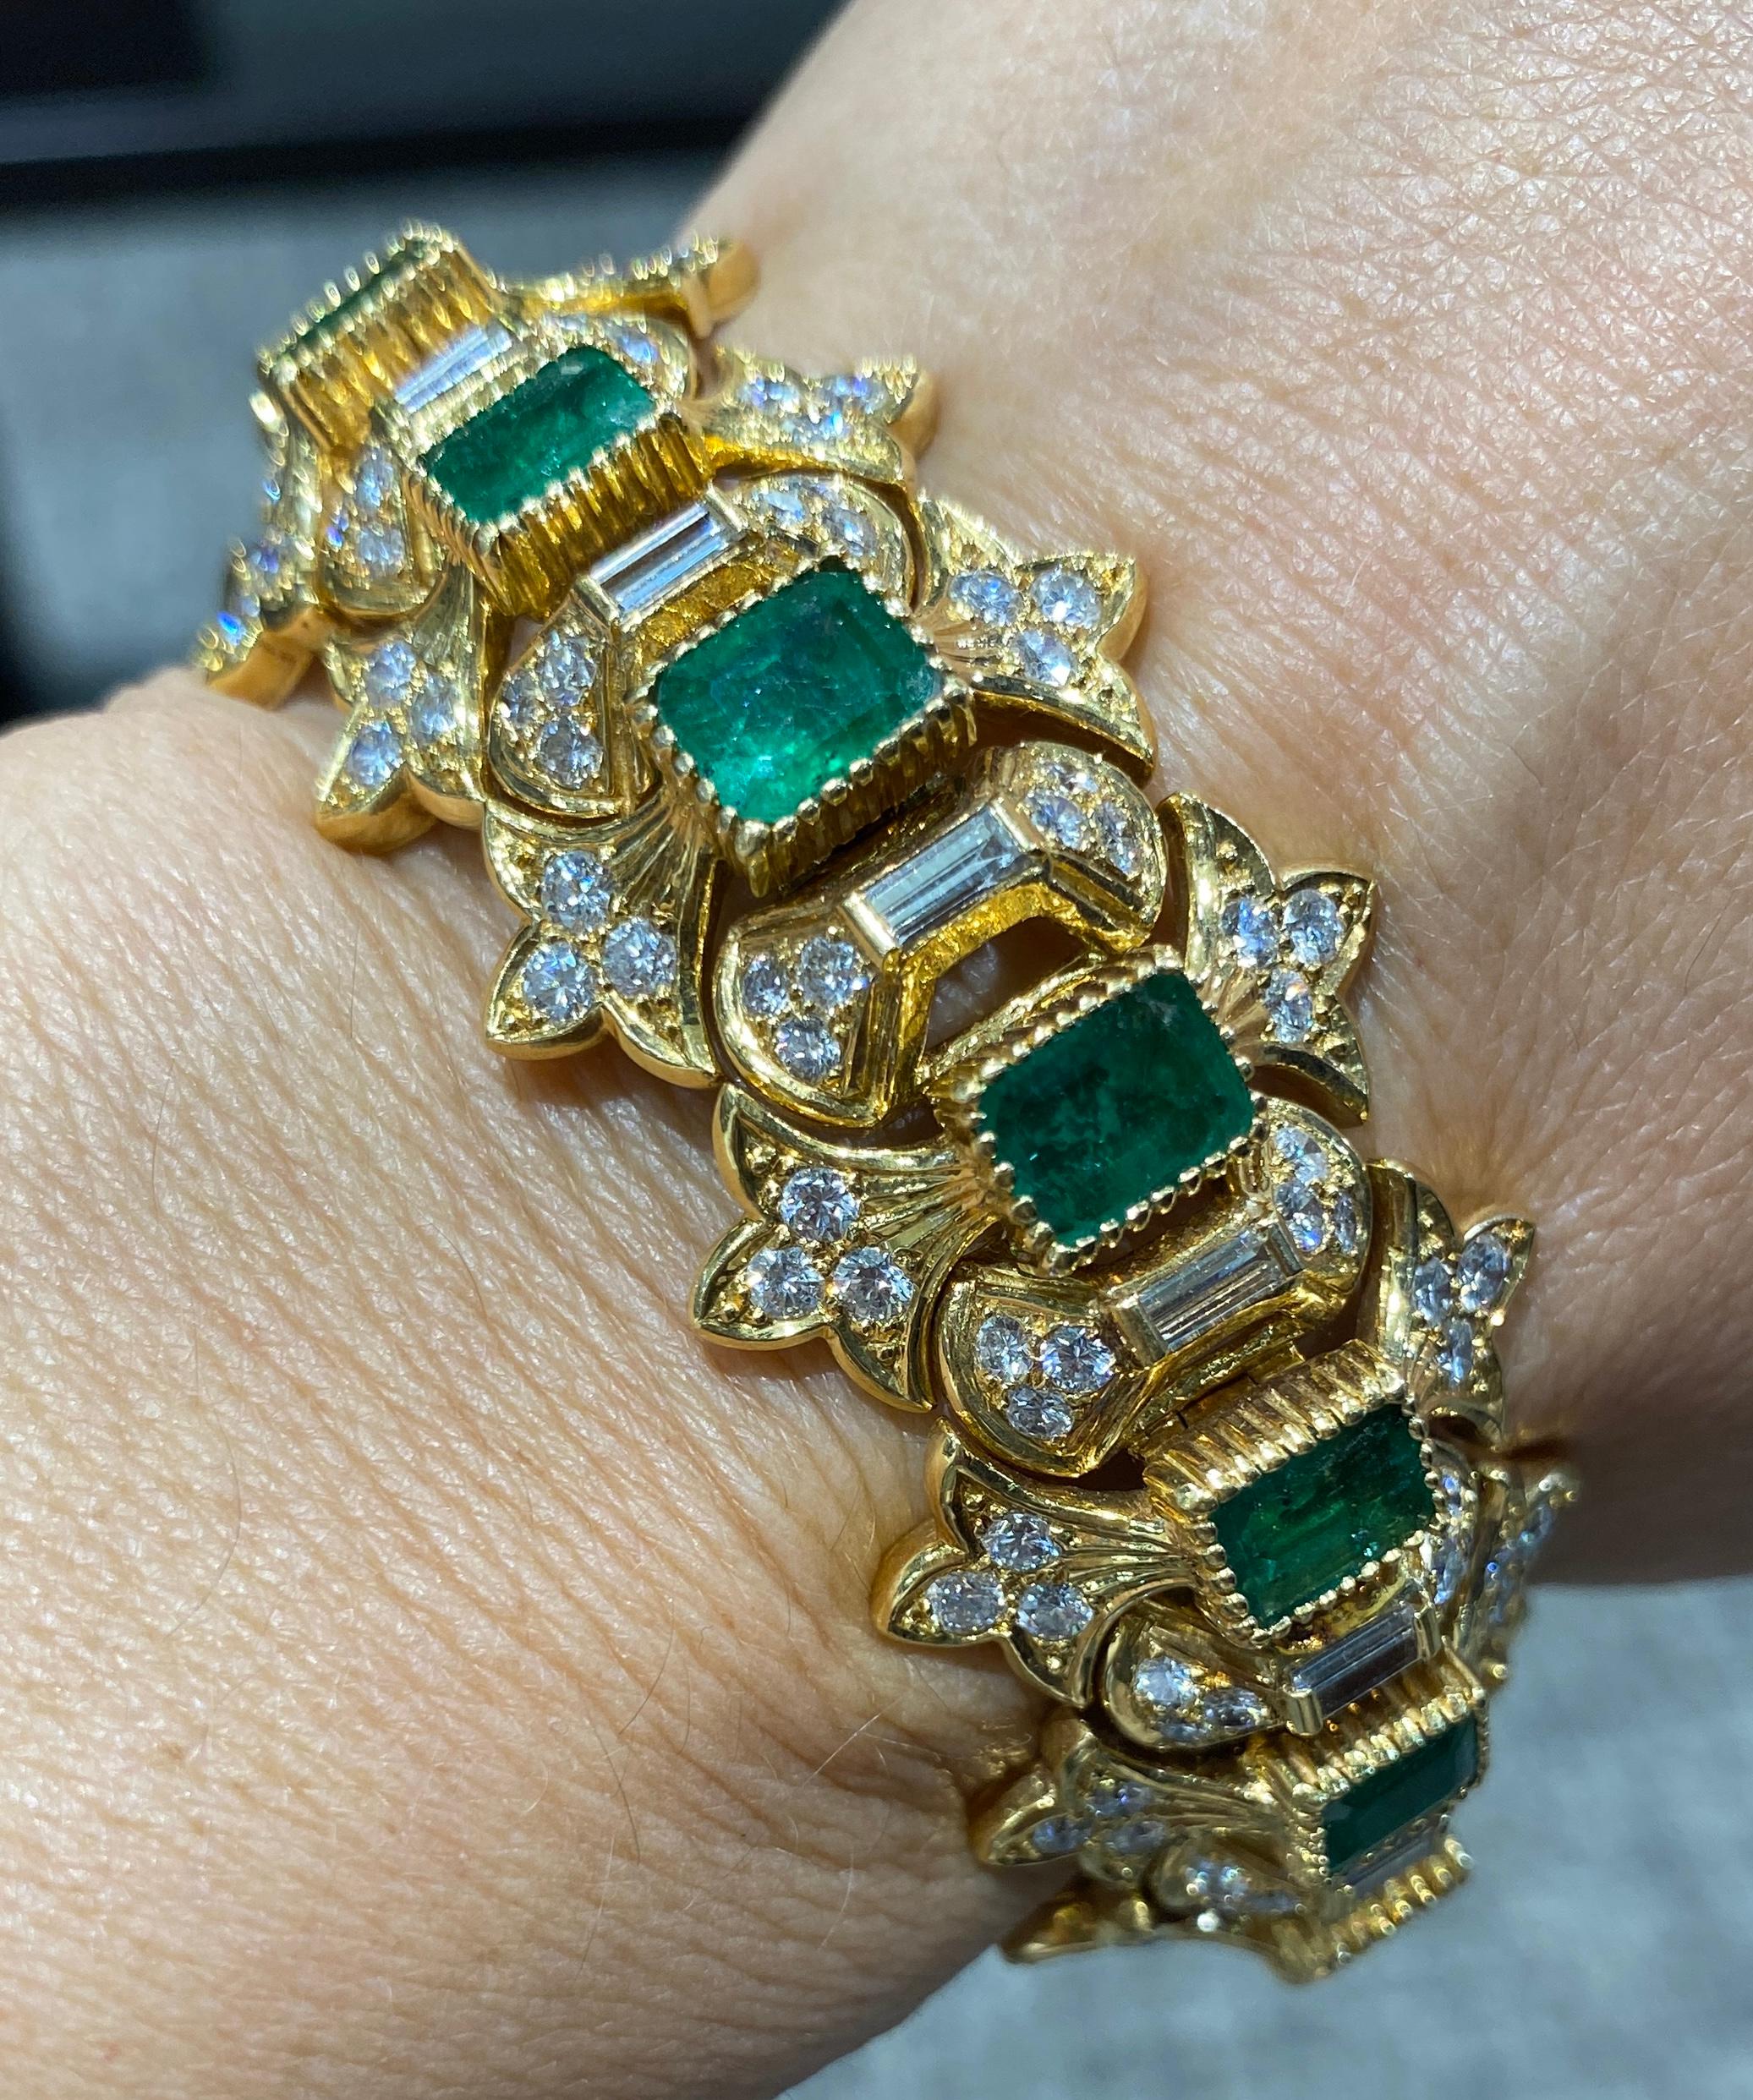 Buccellati 18 carat gold, diamond and emerald bracelet In Excellent Condition For Sale In London, GB